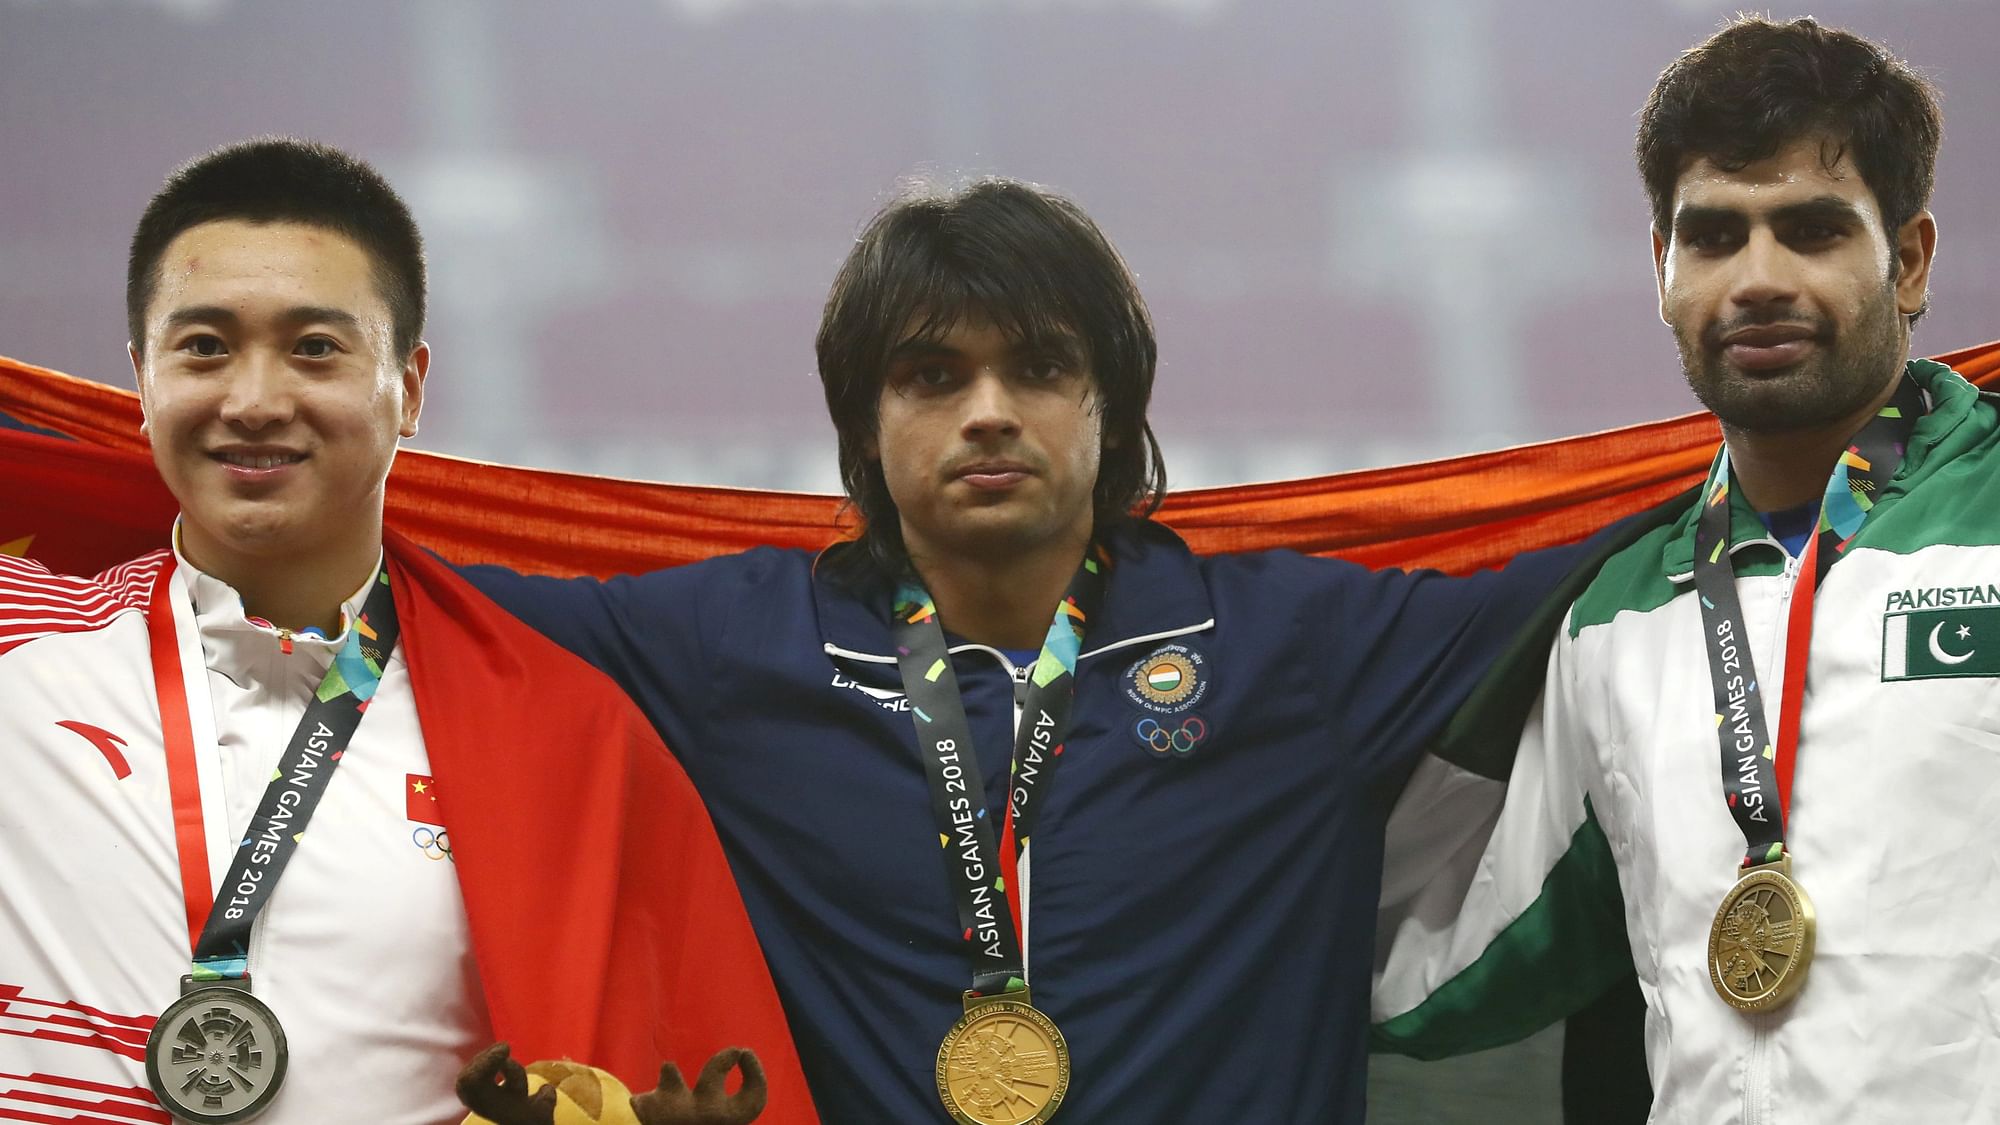 <div class="paragraphs"><p>India’s Neeraj Chopra alongside Pakistan’s Arshad Nadeem (extreme right) during the 2018 Asian Games in Jakarta.</p></div>